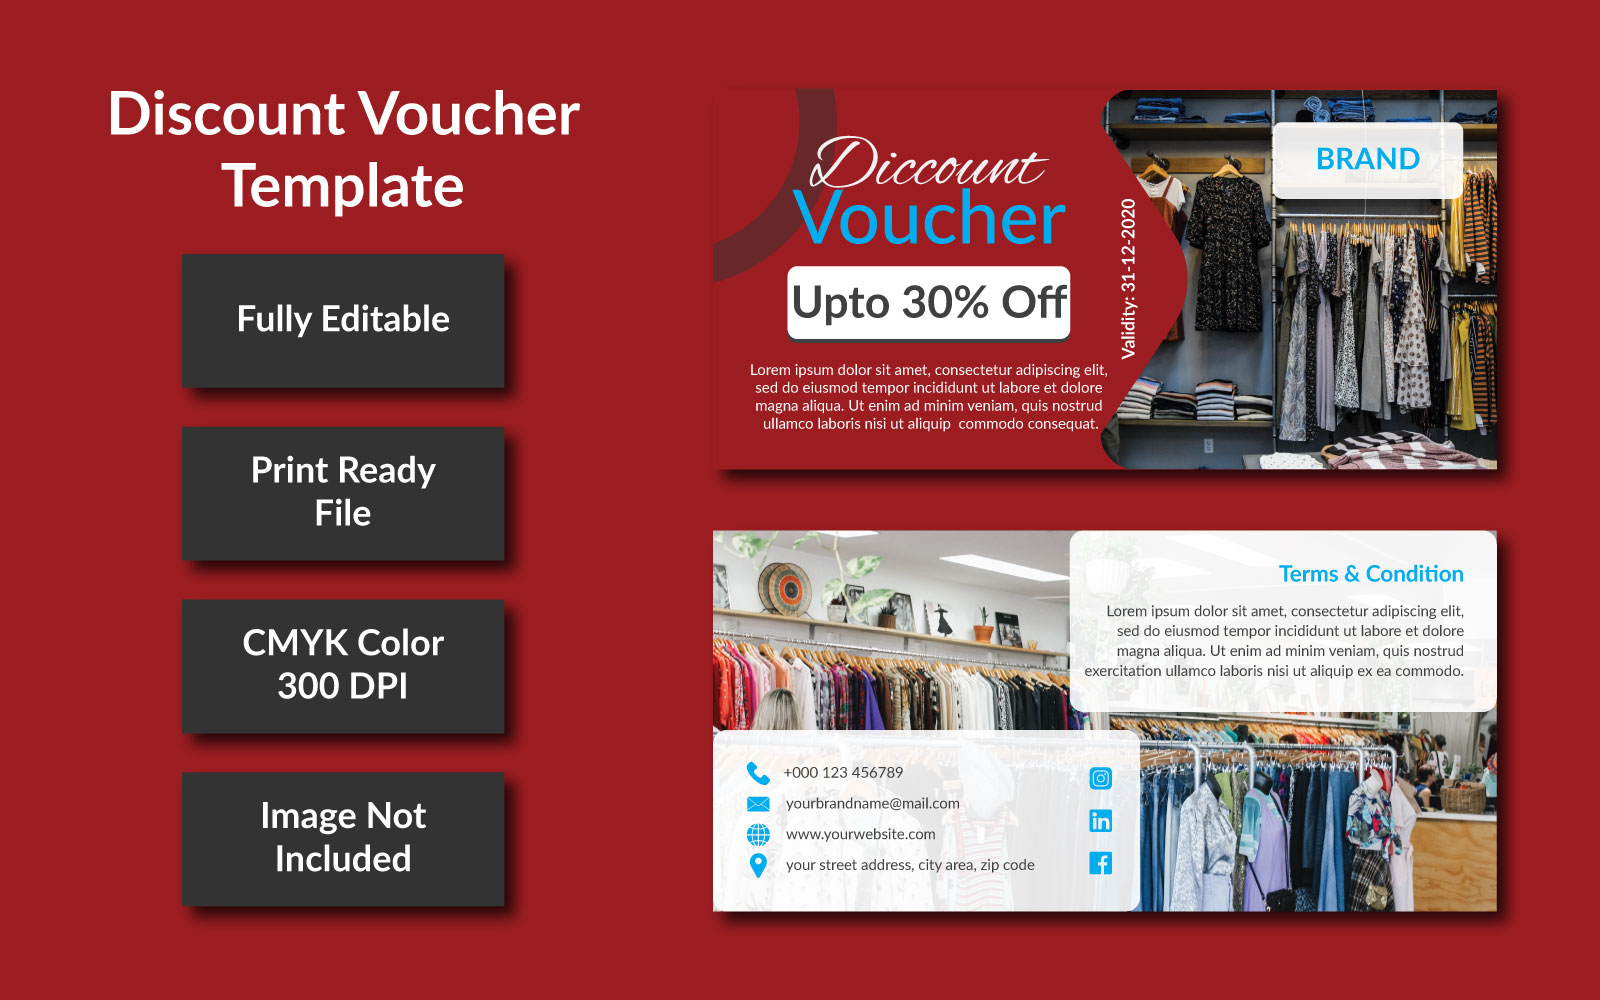 Fashion/Clothing Store Discount Voucher Template - Vector Image